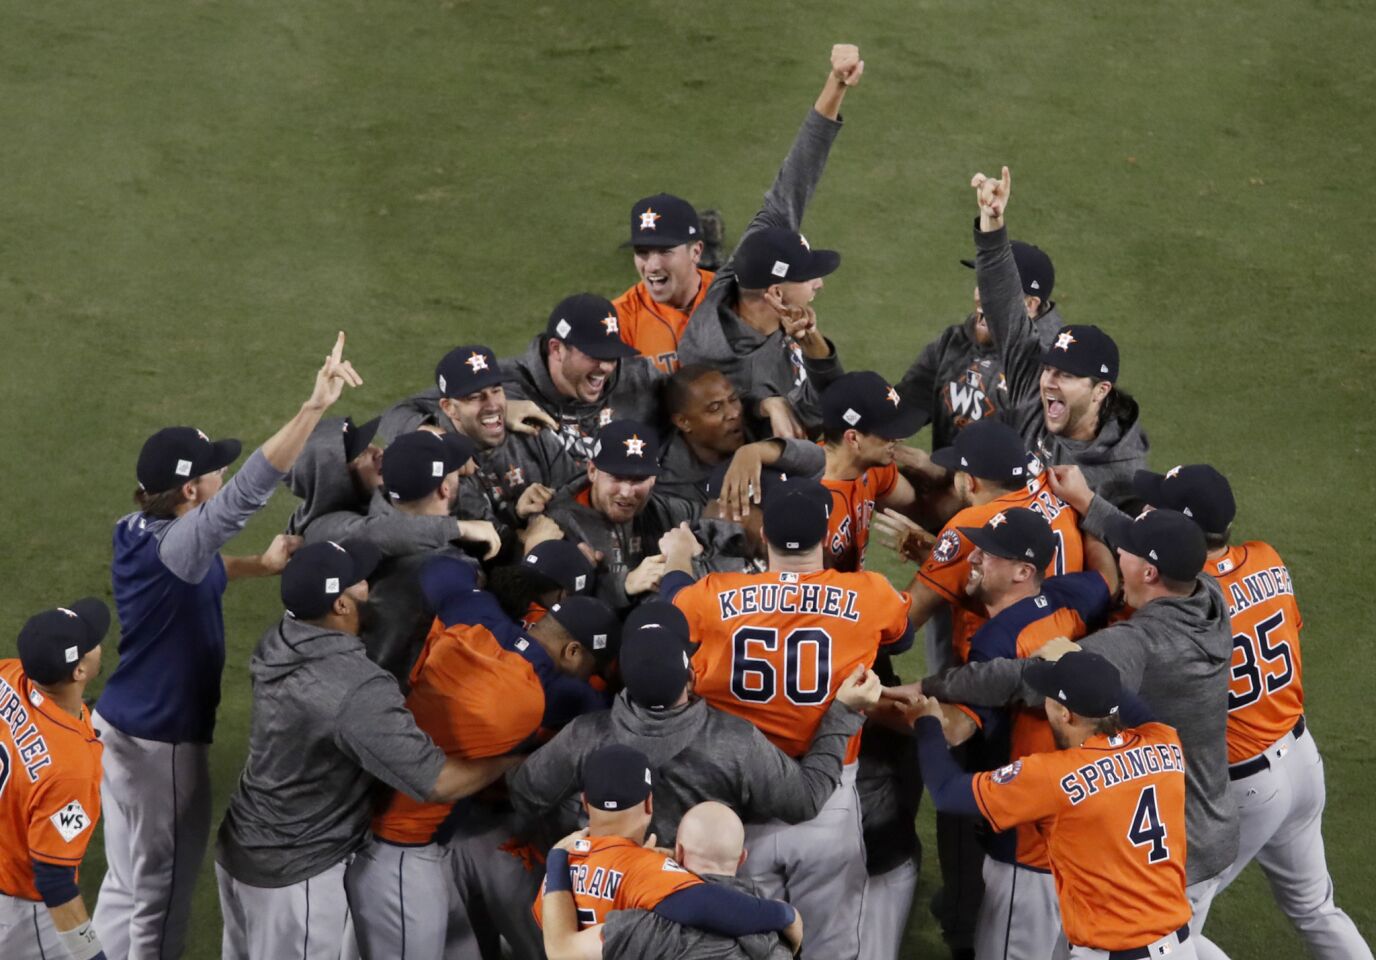 The Houston Astros celebrate beating the Dodgers, 5-1, in Game 7 to win their first World Series.